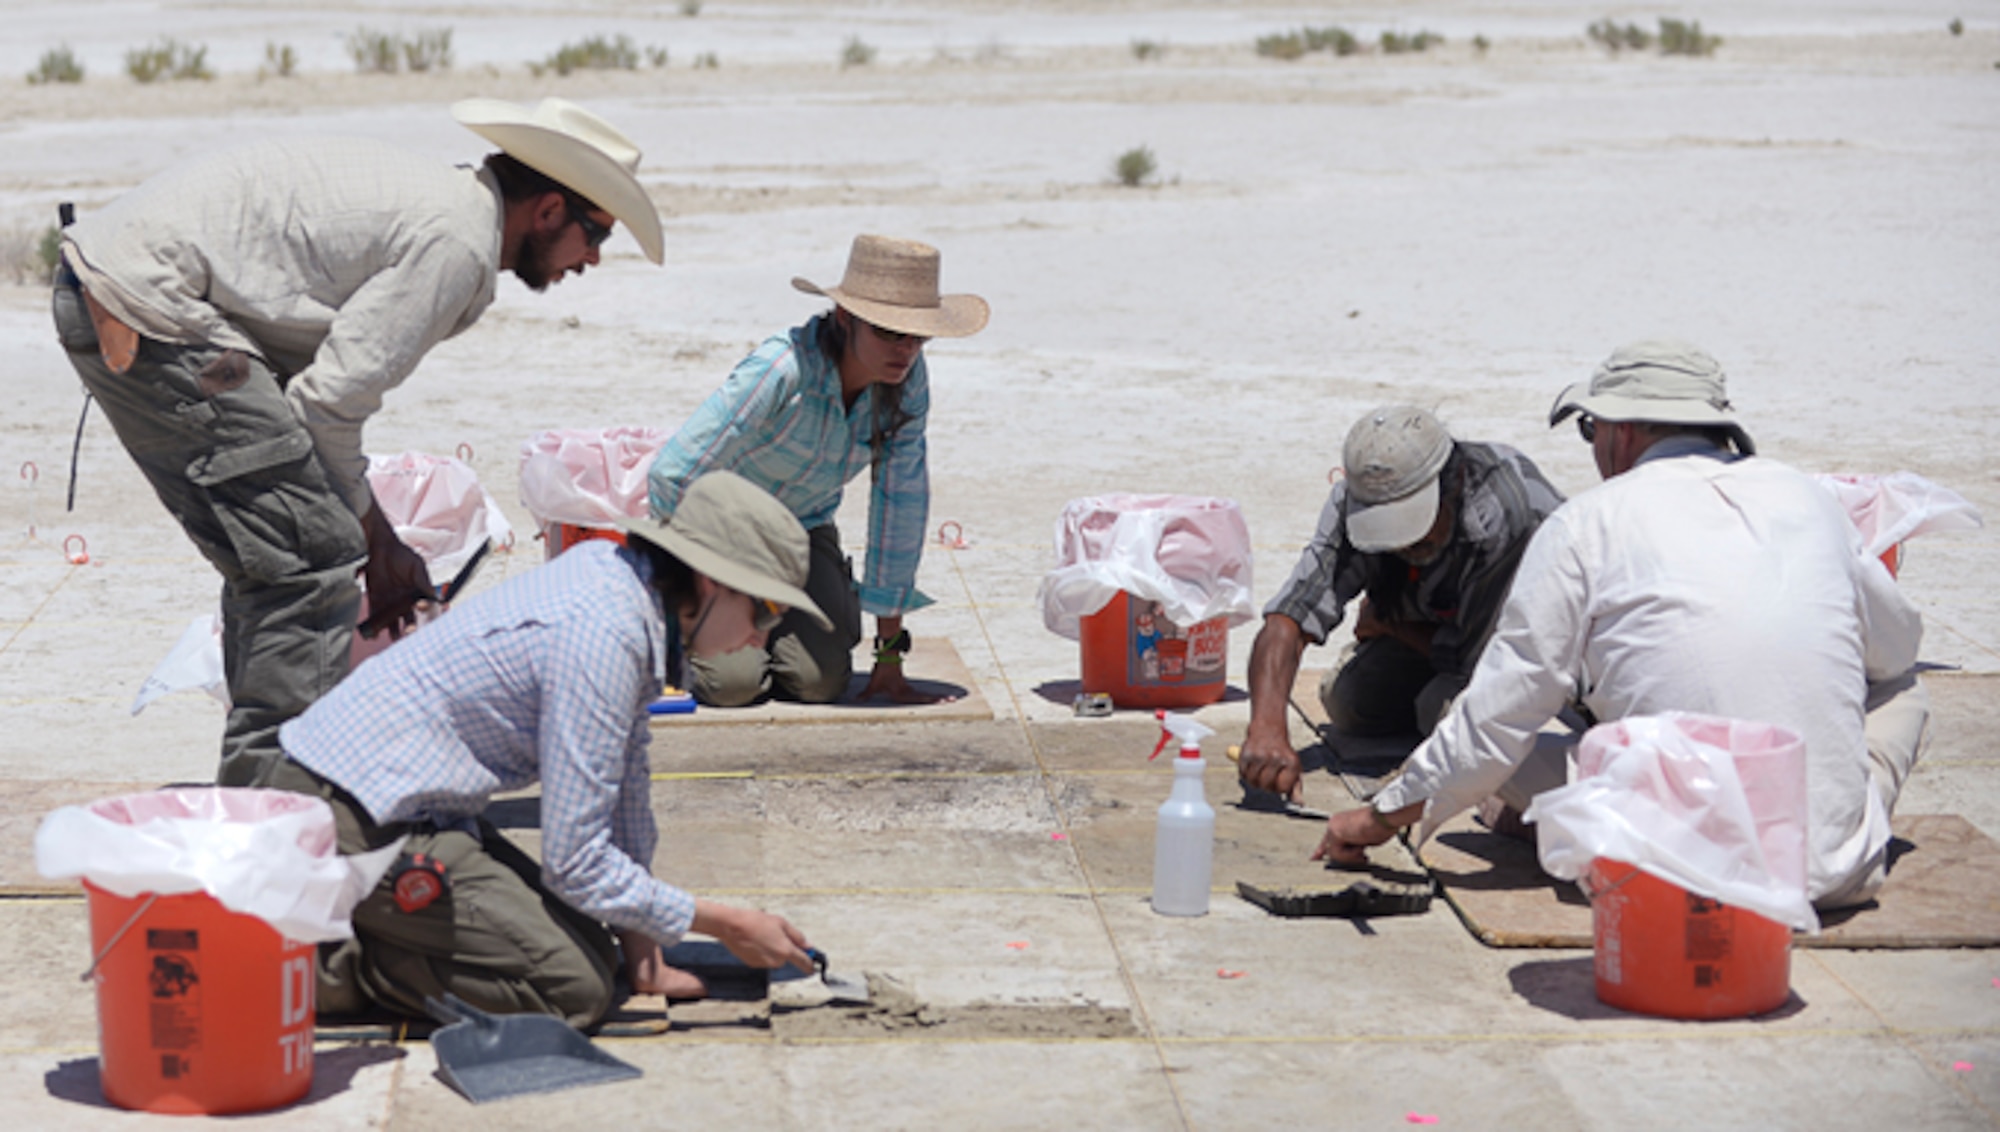 Archaeologists excavate a site on the Utah Test and Training Range, July 13, 2016. The team found tools, charcoal, water fowl bone fragments, and tooling flakes, which provide evidence of wetlands and human presence in the area more than 12,000 years ago. (U.S. Air Force photo by Todd Cromar)